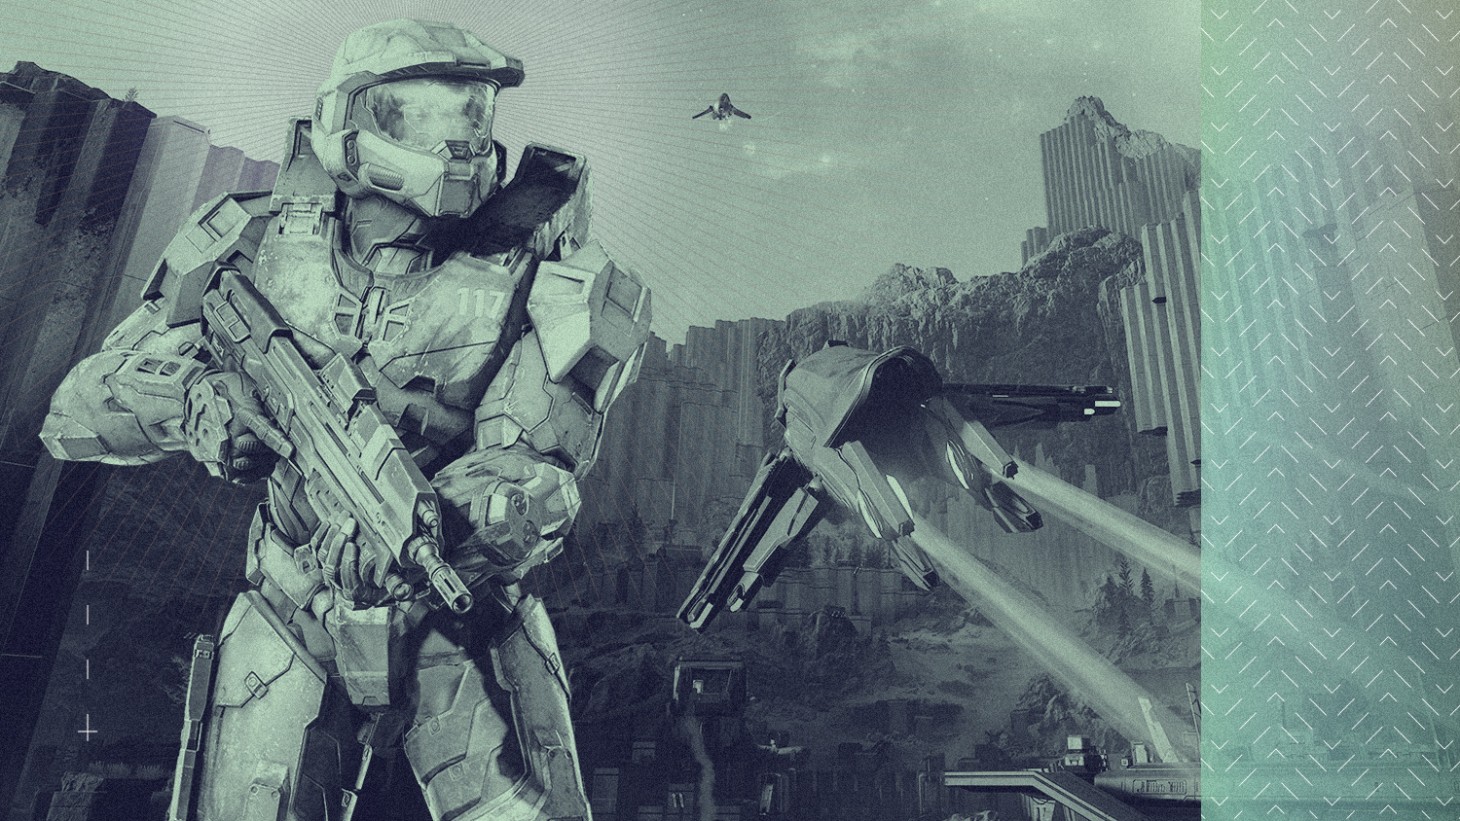 Halo: Reach brings the series back to PC with a mostly fantastic